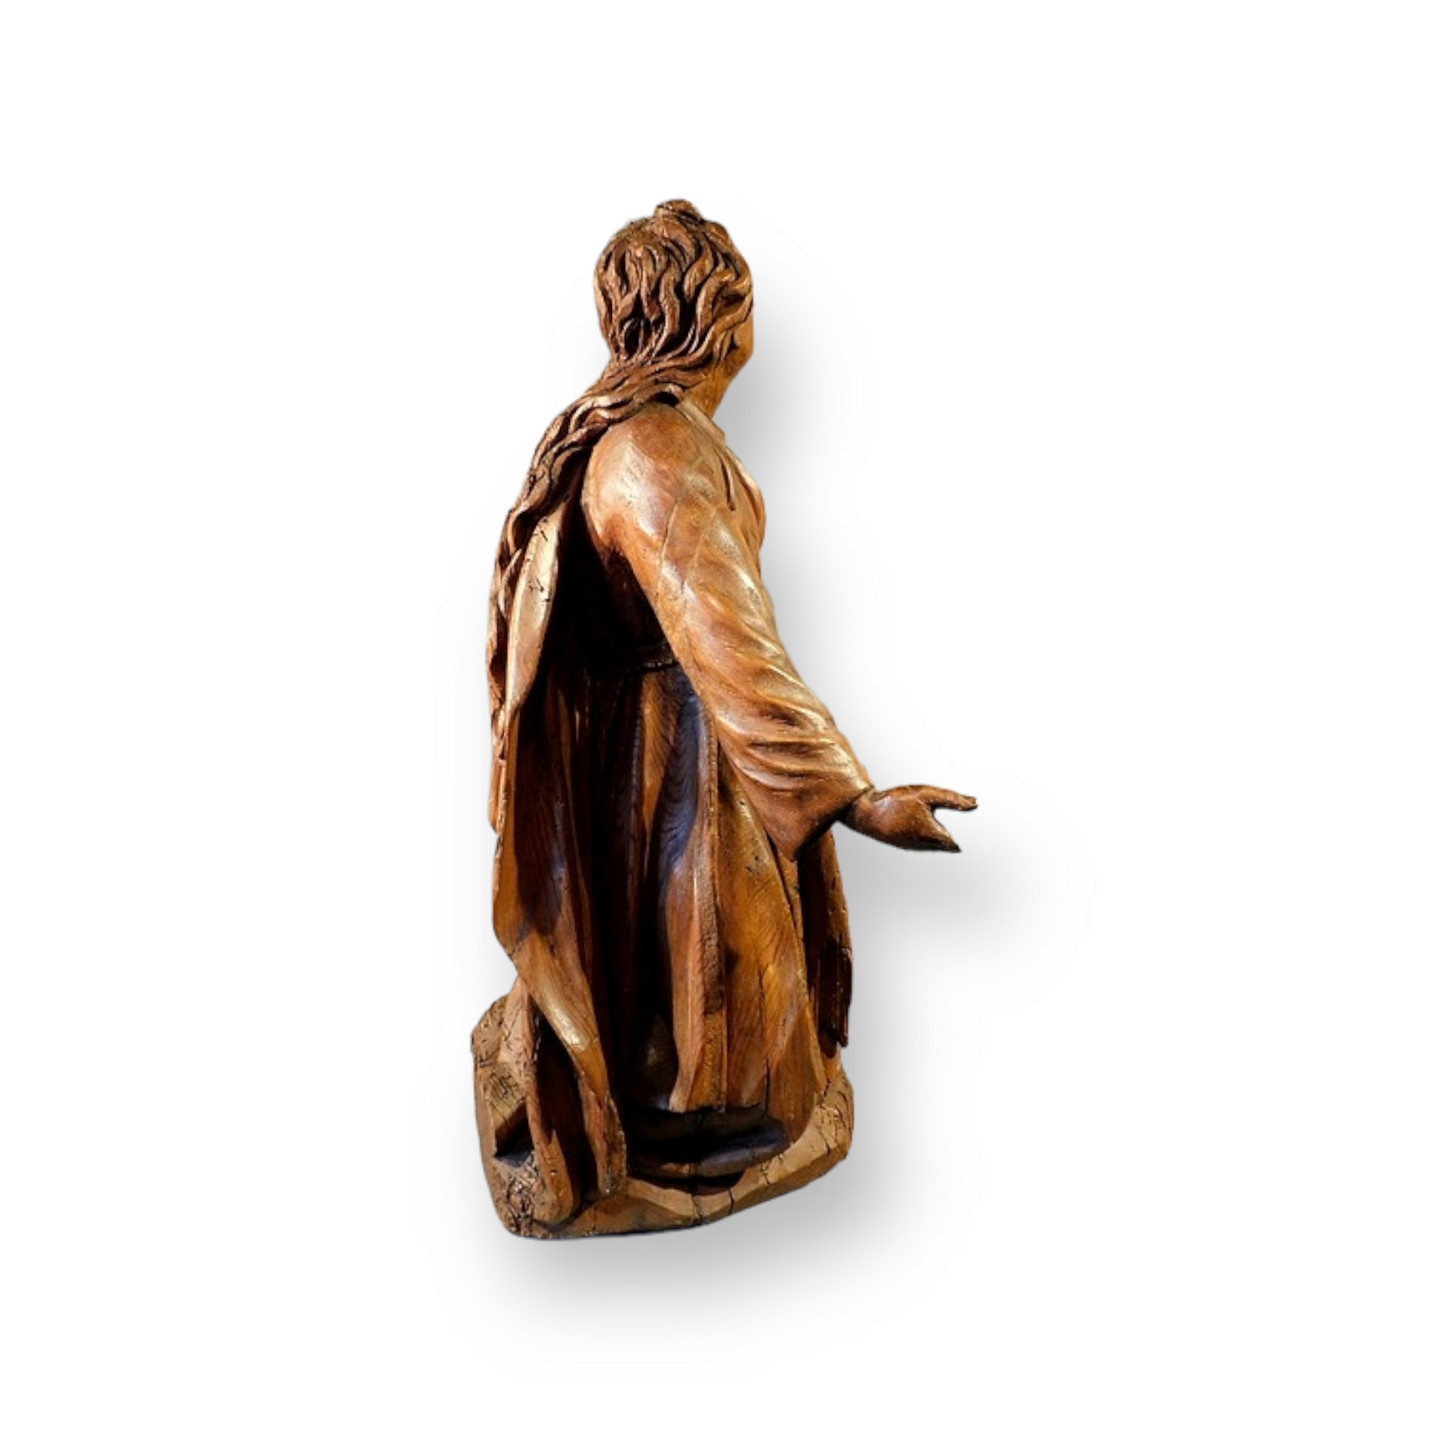 Early 17th Century Antique Carved Pine Sculpture of Mary Magdalene Depicted Kneeling